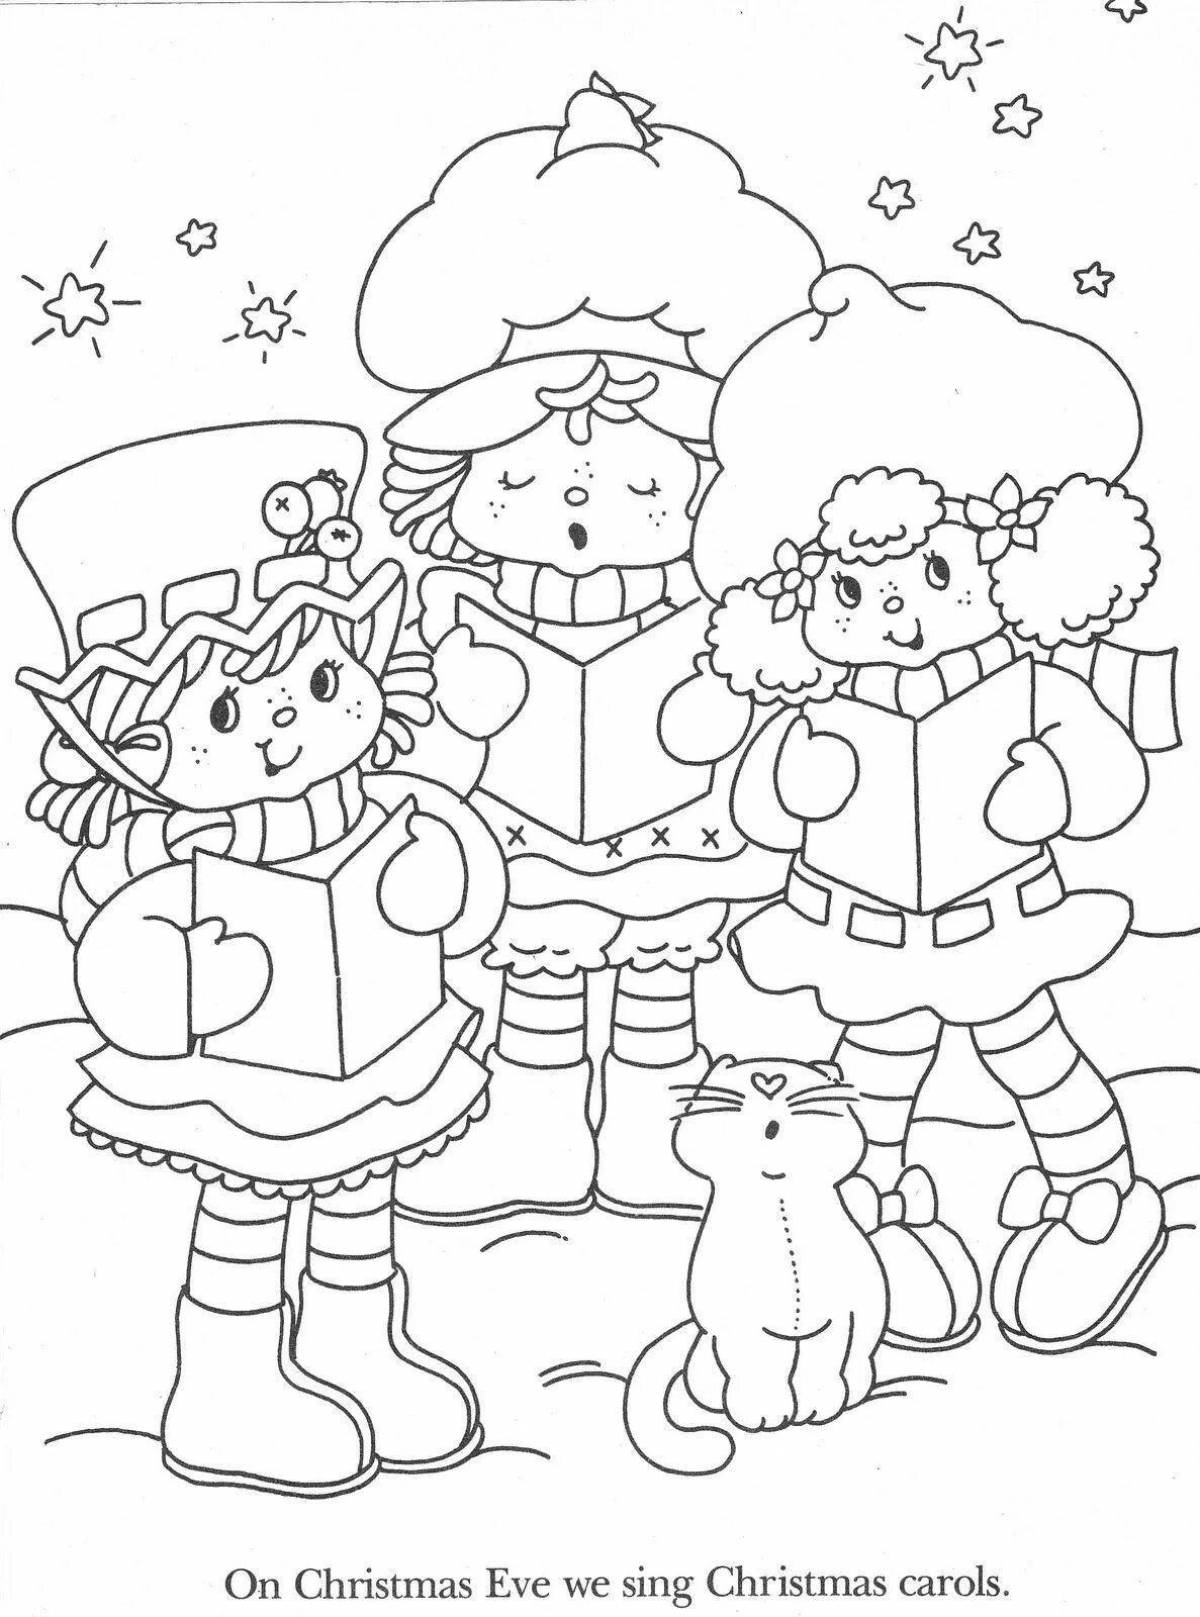 Holiday coloring carols for children 6 7